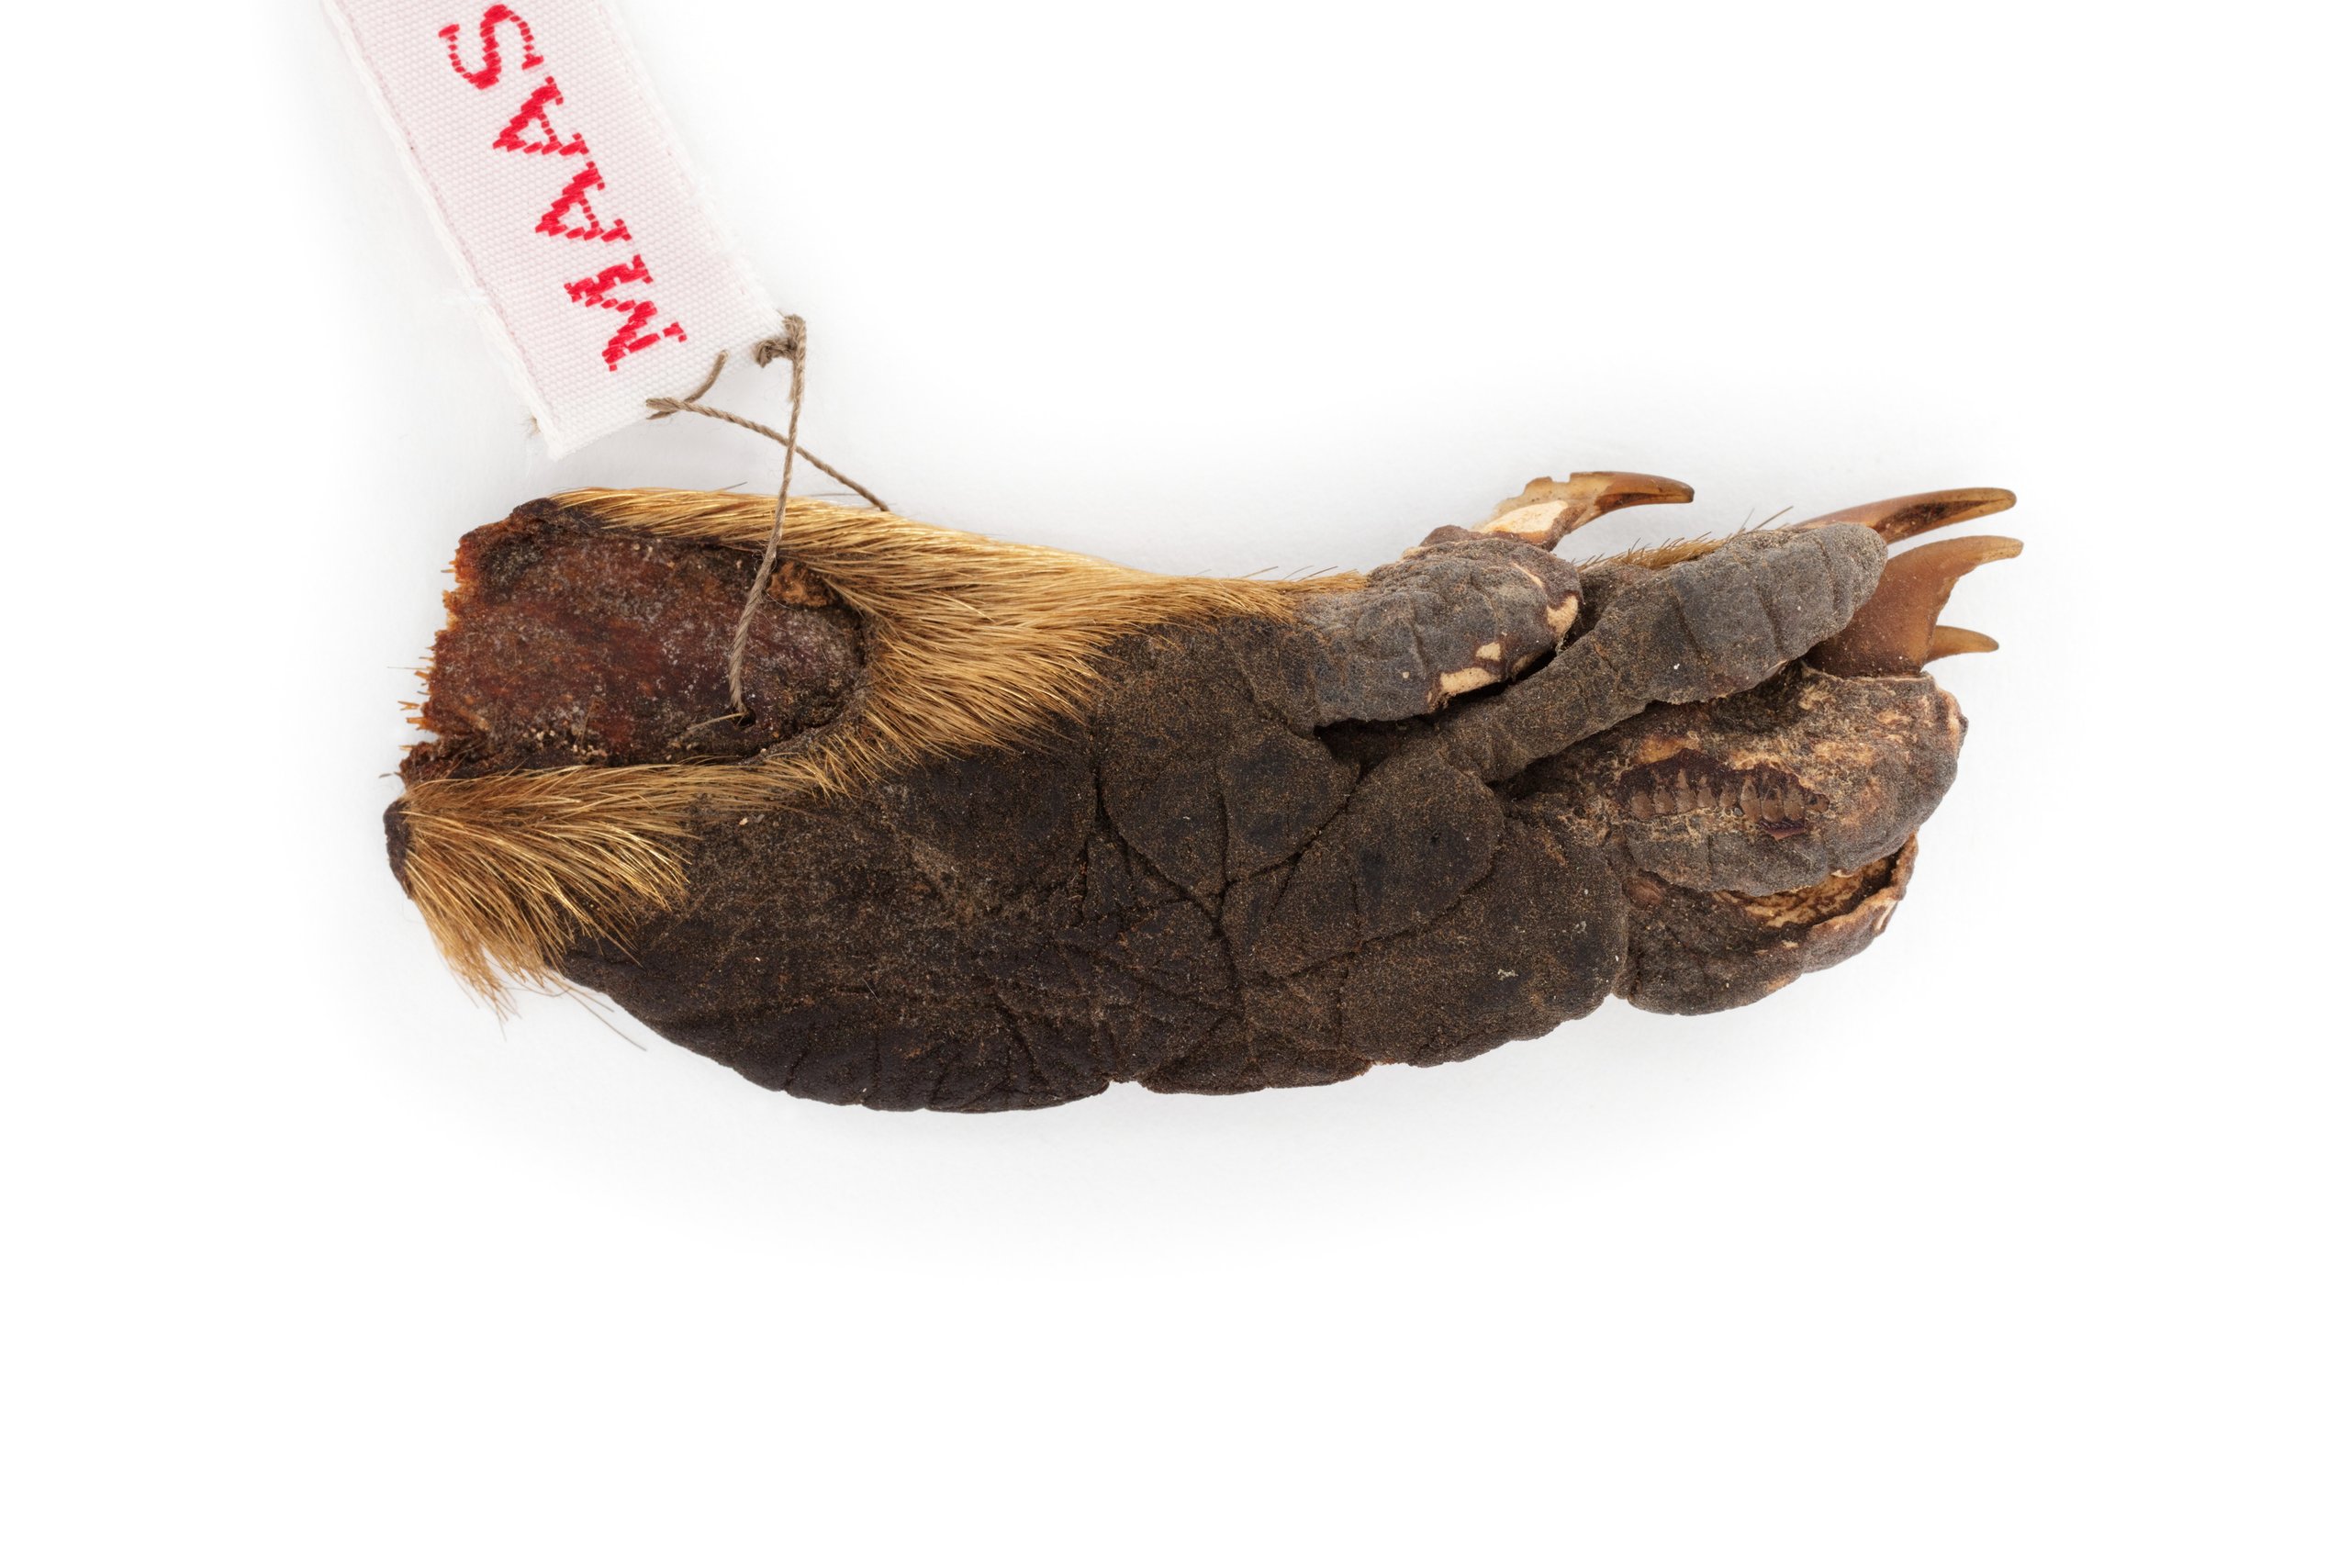 Dried raccoon paw travel memento from Canada collected by George and Charis Schwarz